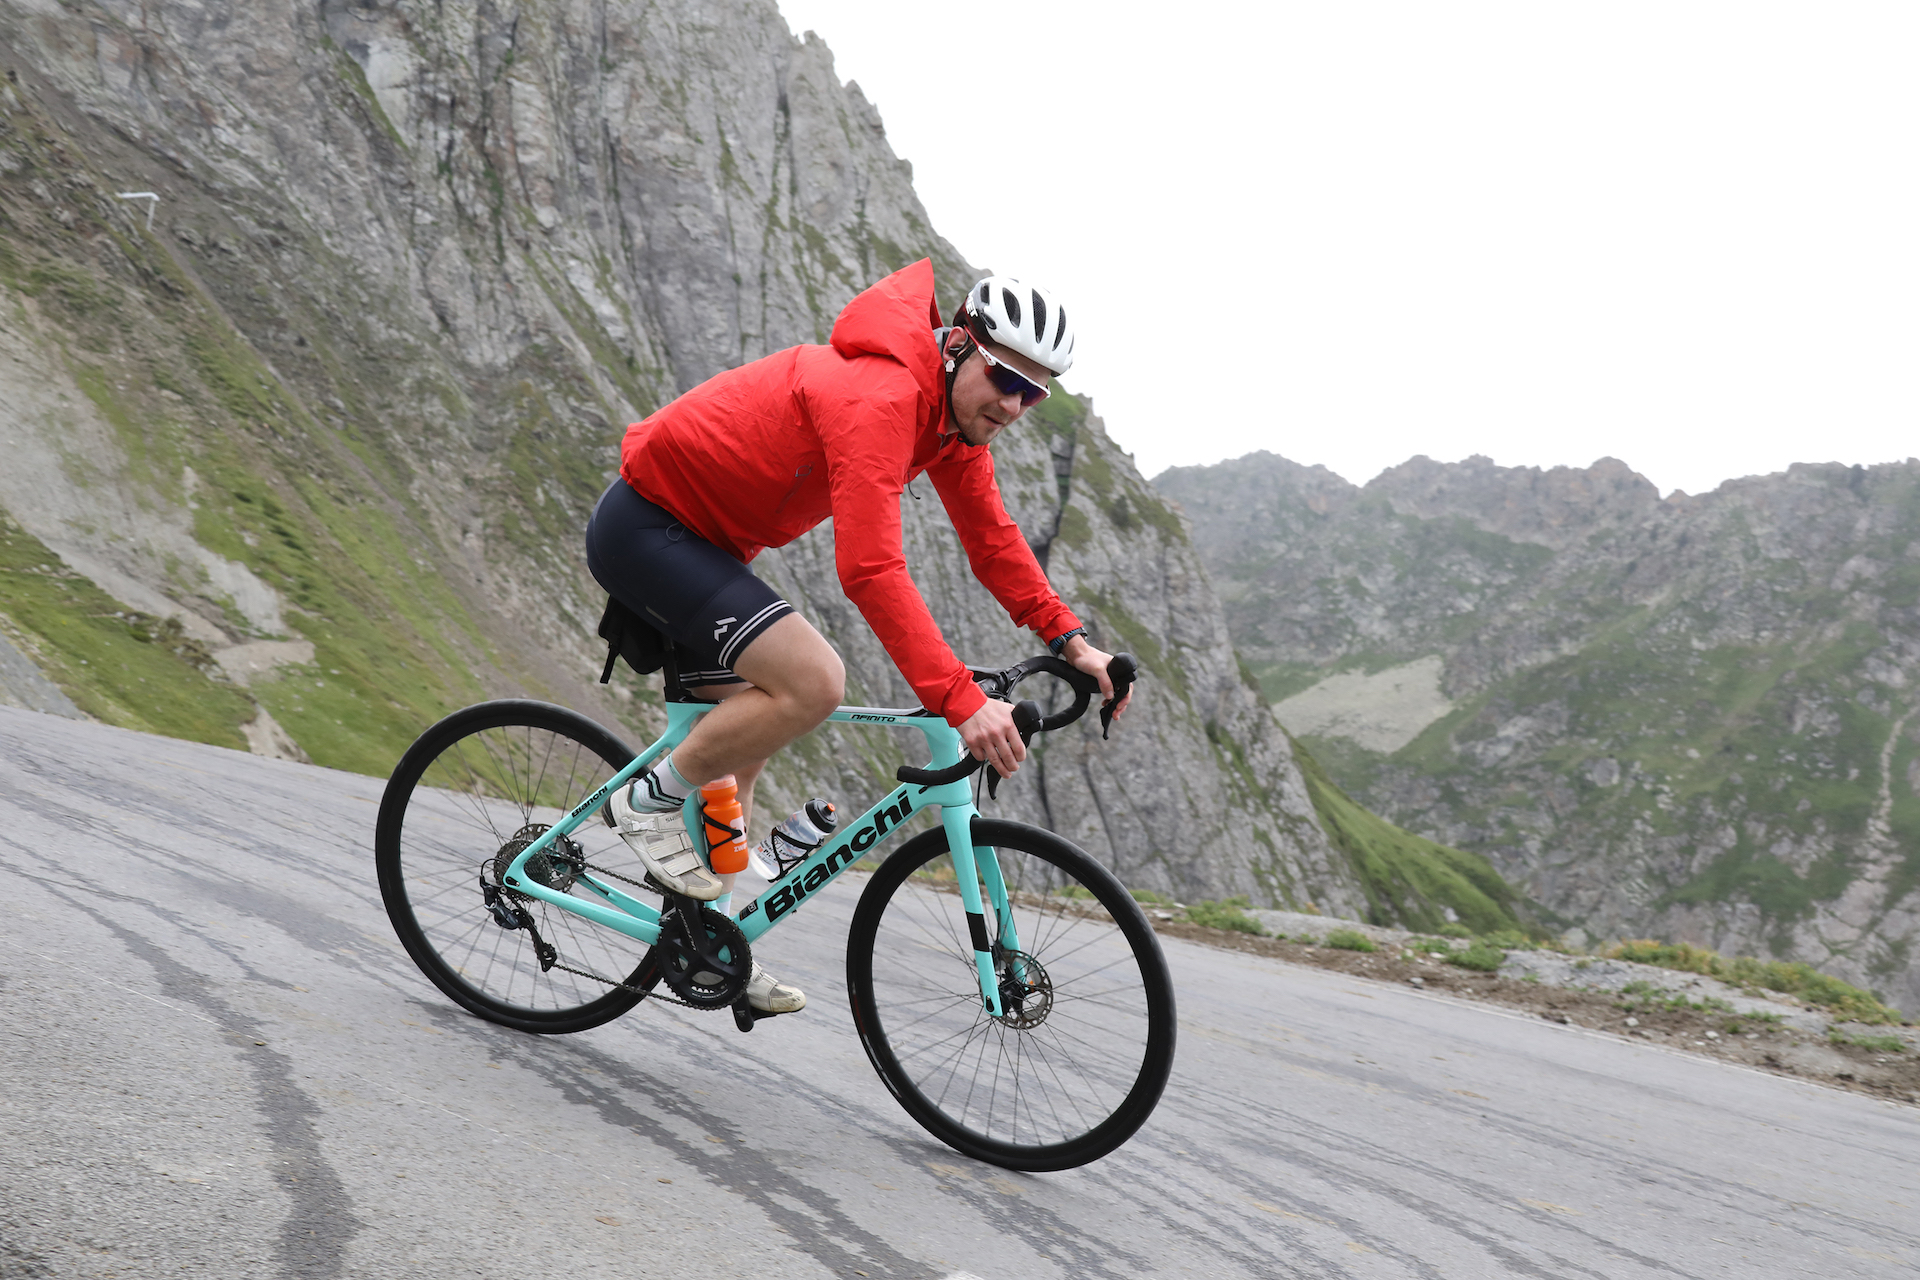 The author on a celeste-green Bianchi Infinito rental bike, wearing black shorts and a red hooded jacket for the chilly descent. He rounds a corner with tall peaks behind him.